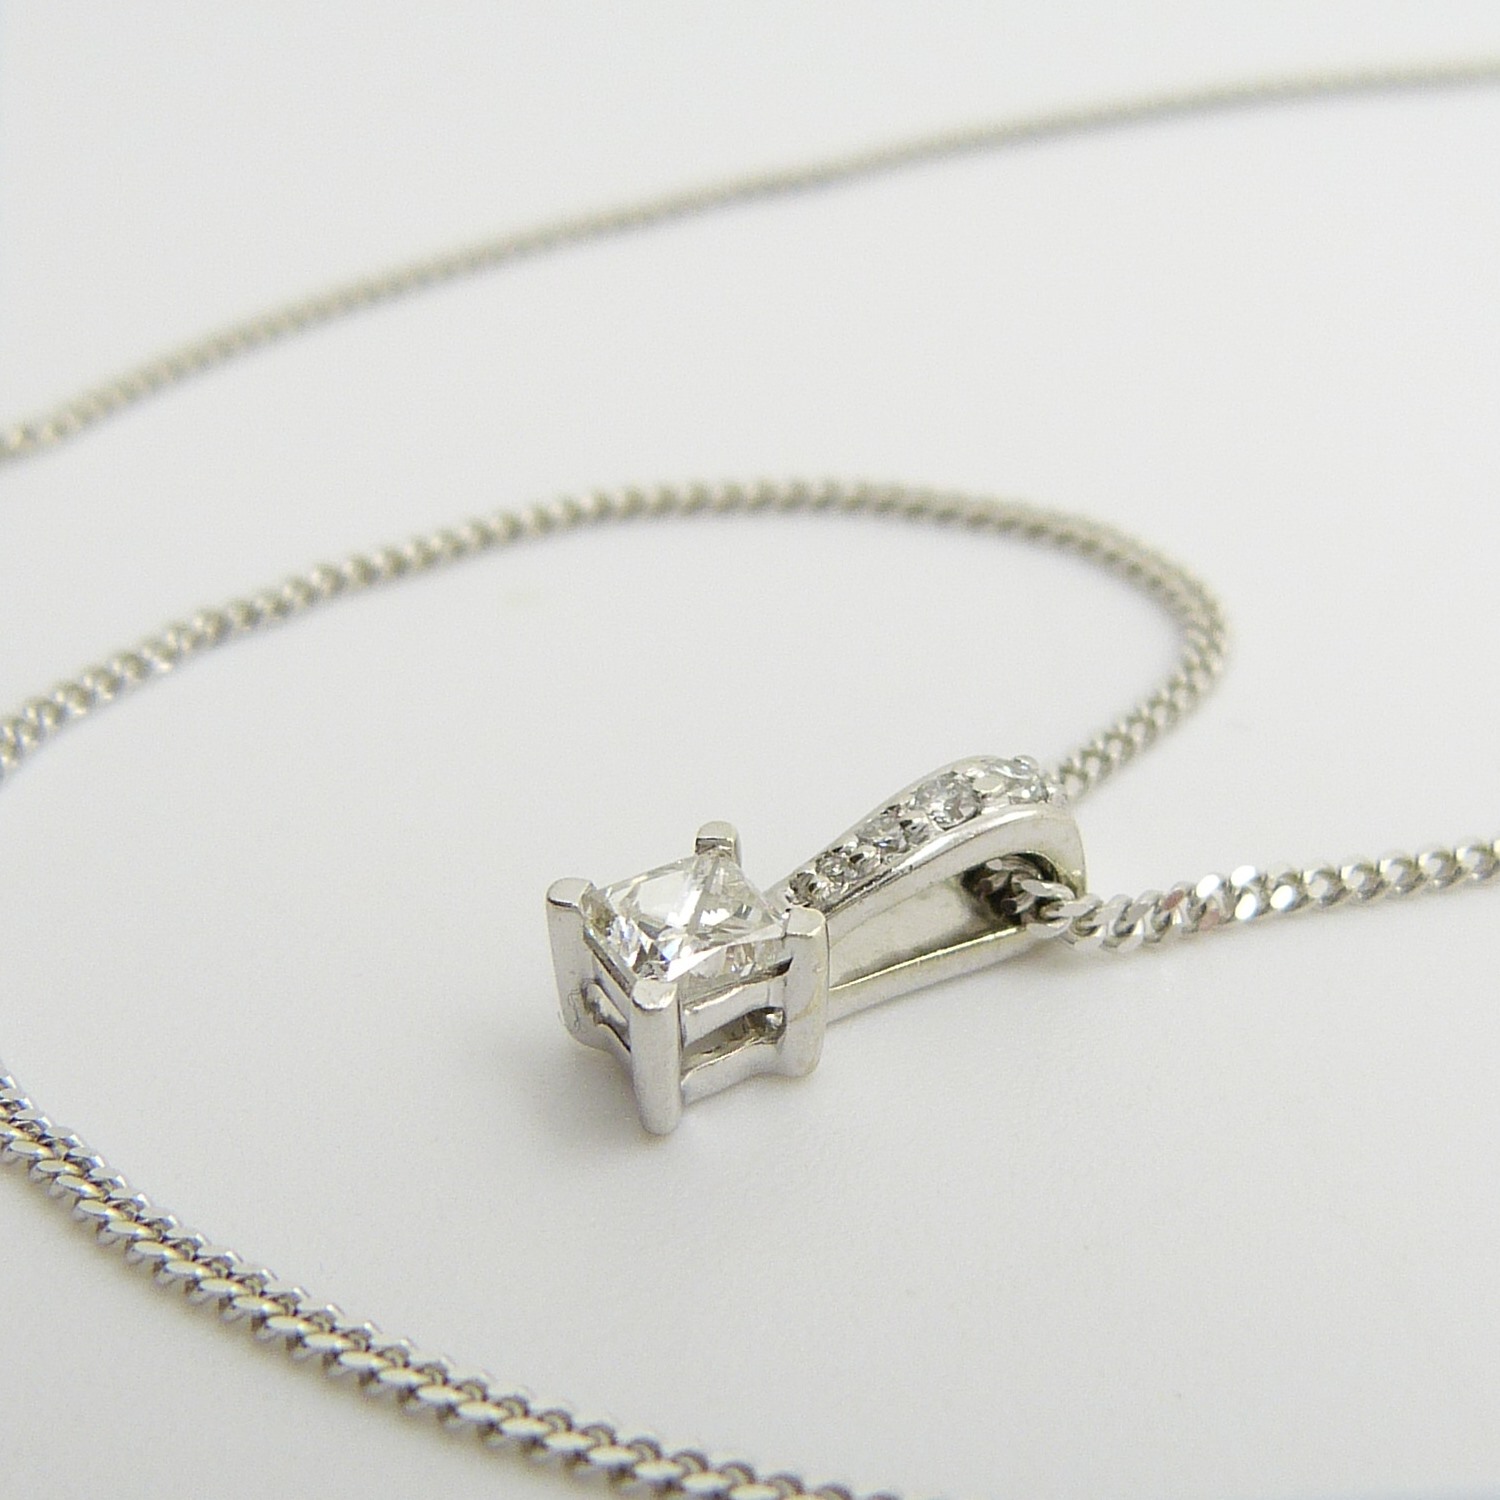 A pre-owned 0.30 carat princess-cut solitaire diamond pendant and chain, boxed - Image 5 of 9